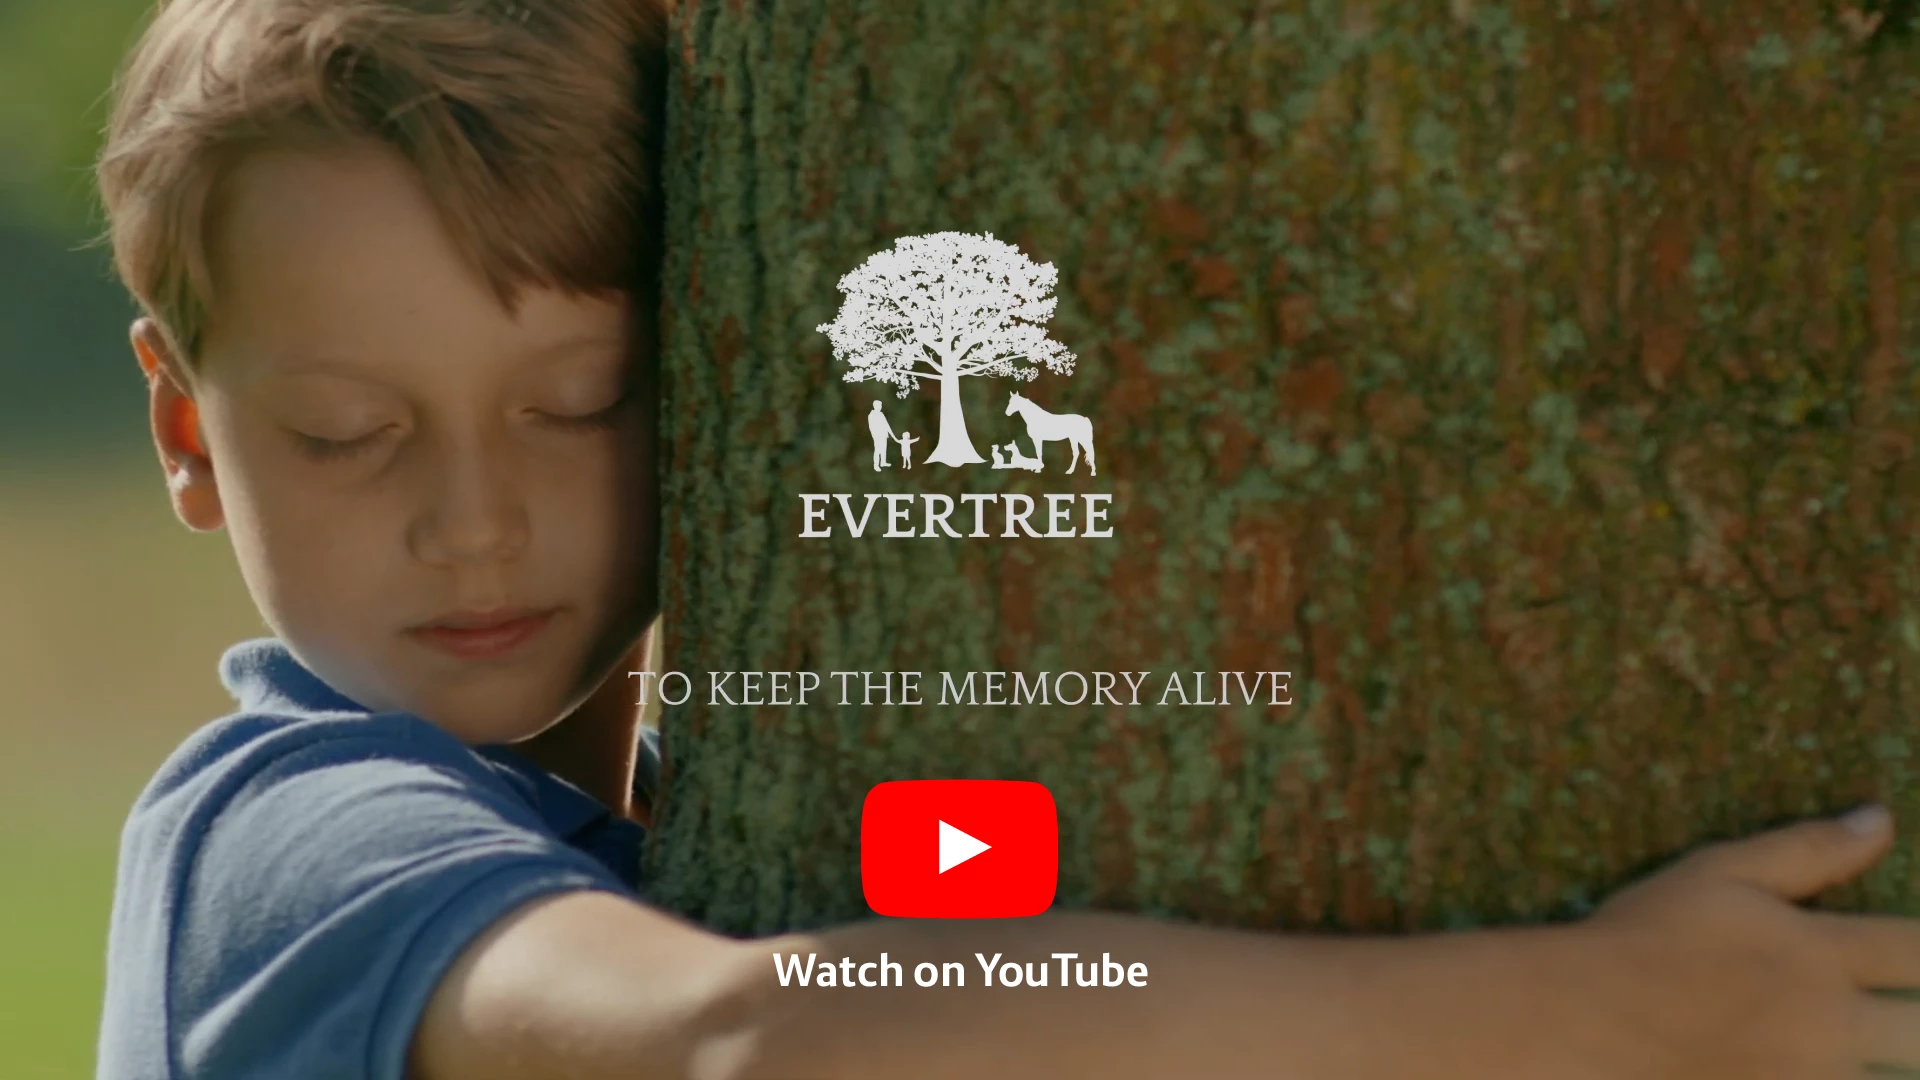 EVERTREE Video - Watch on YouTube